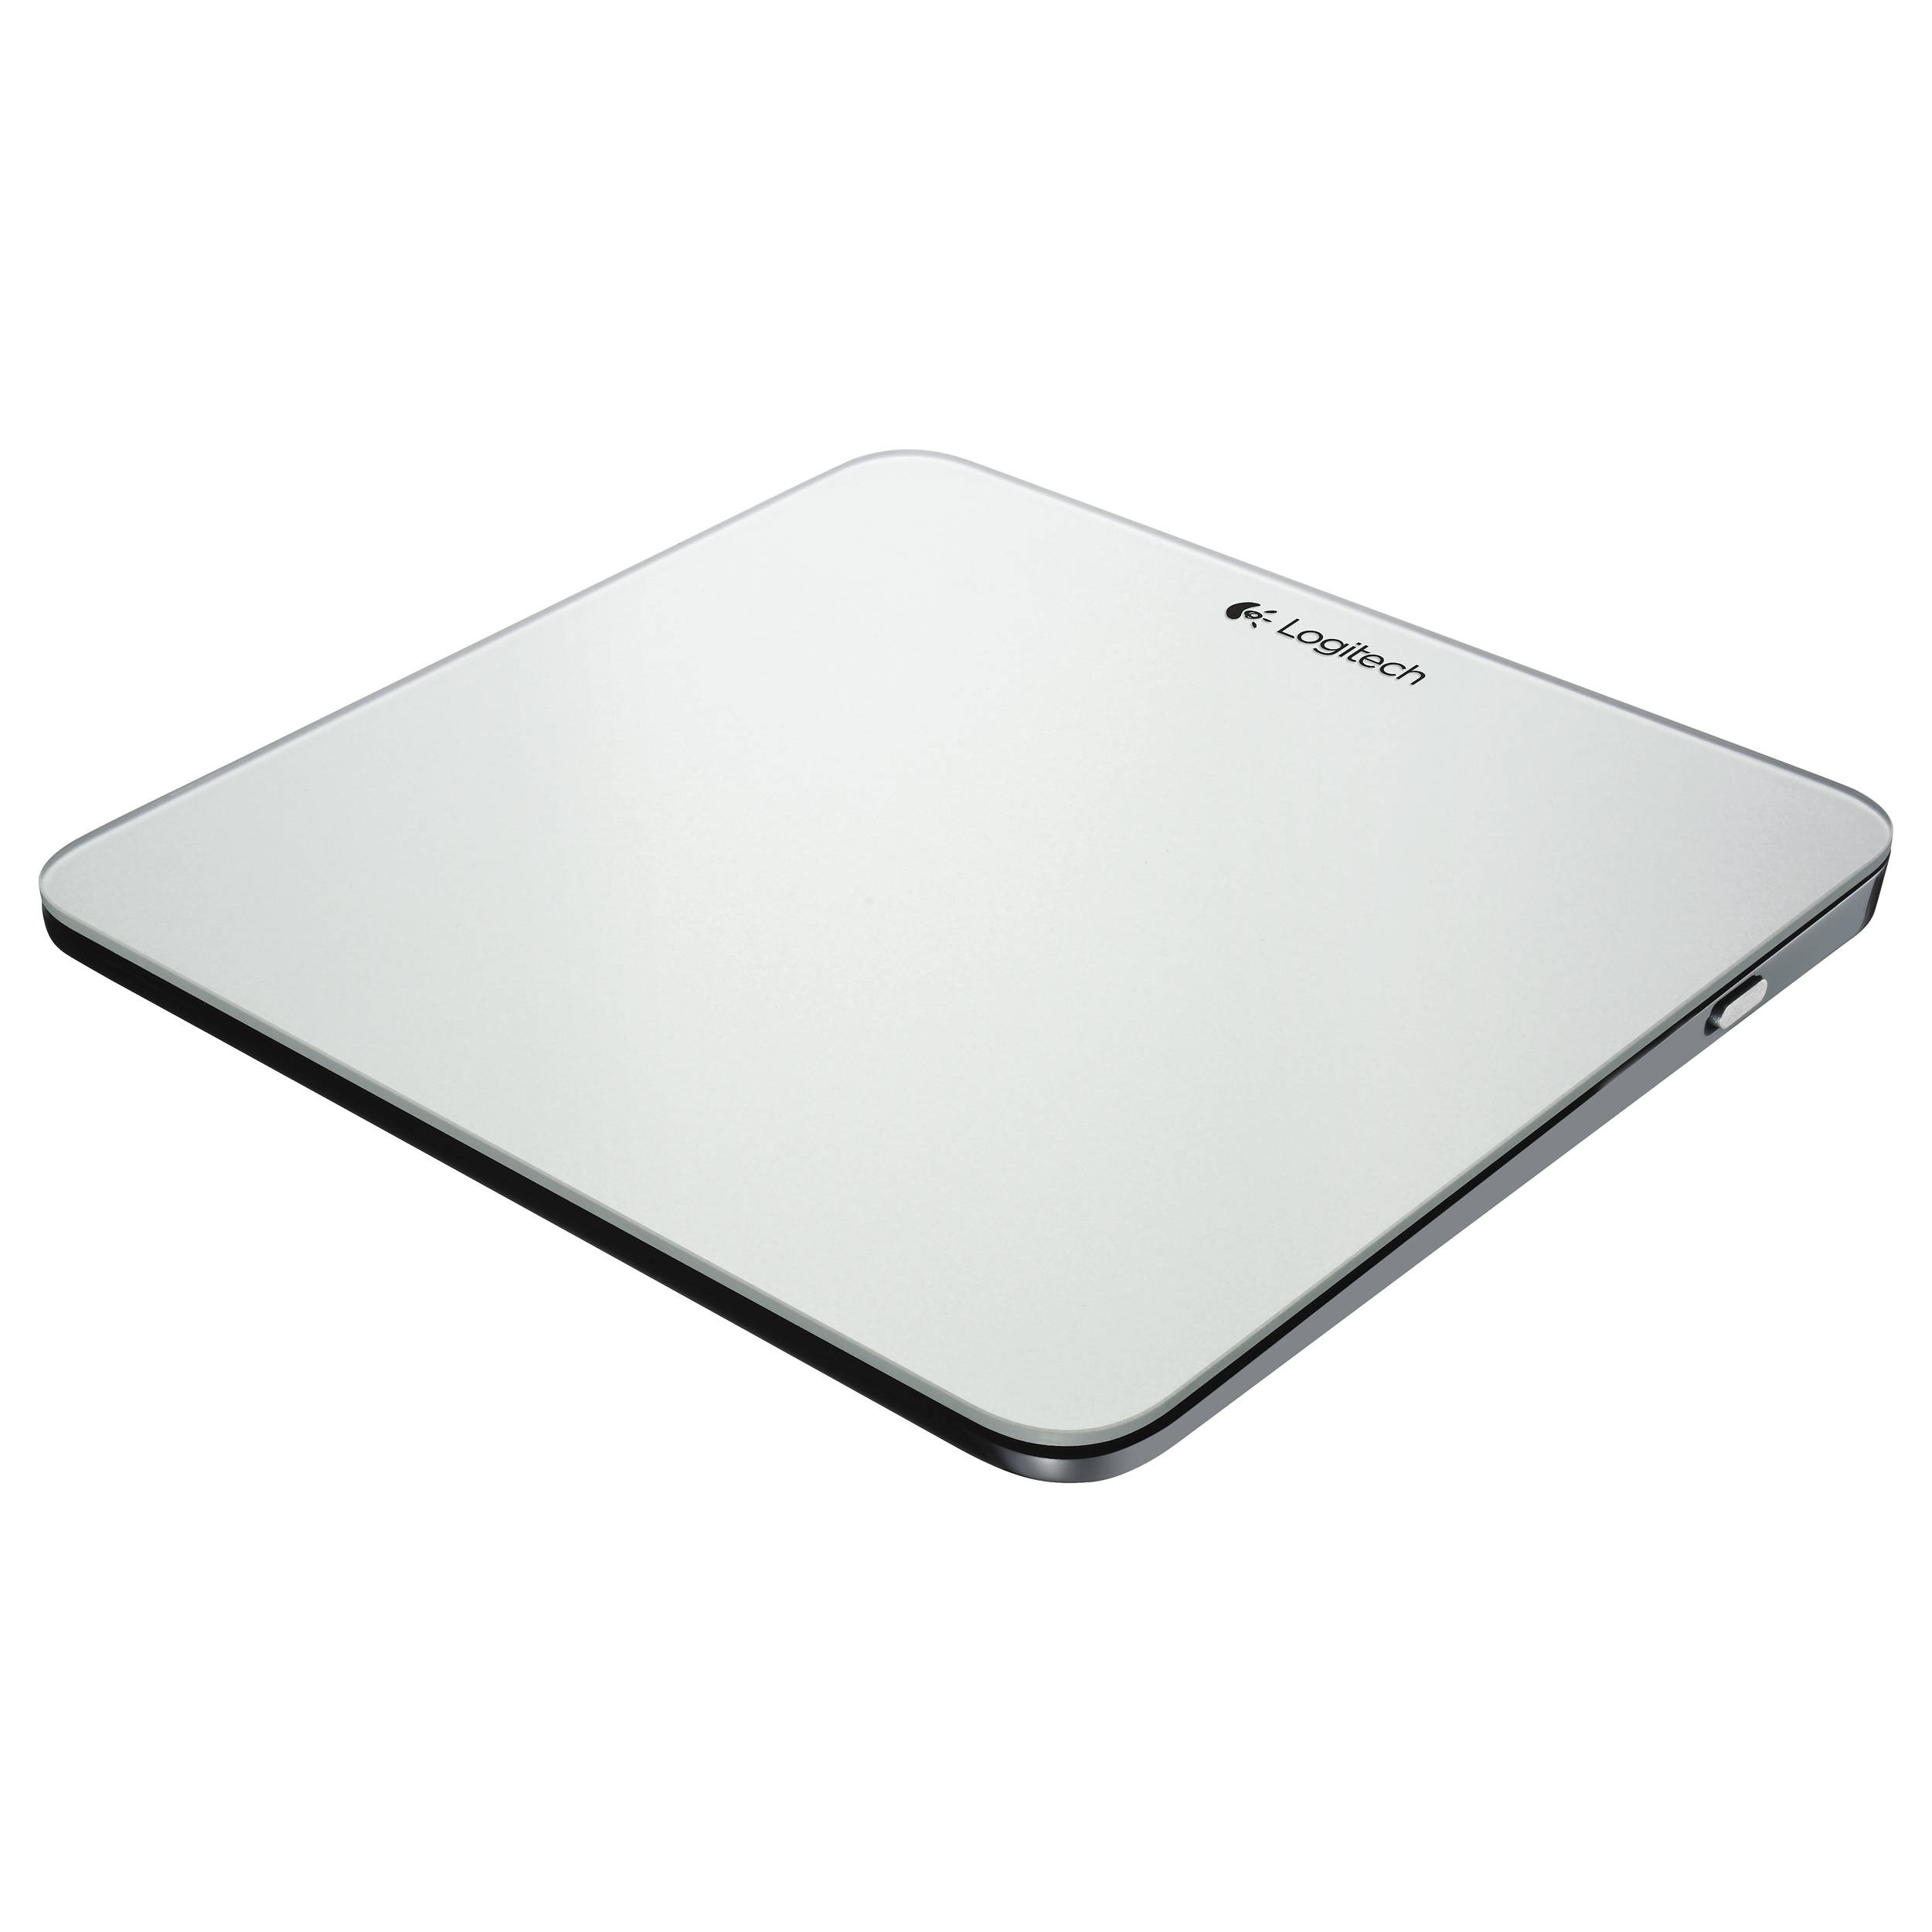 Trackpad For Mac